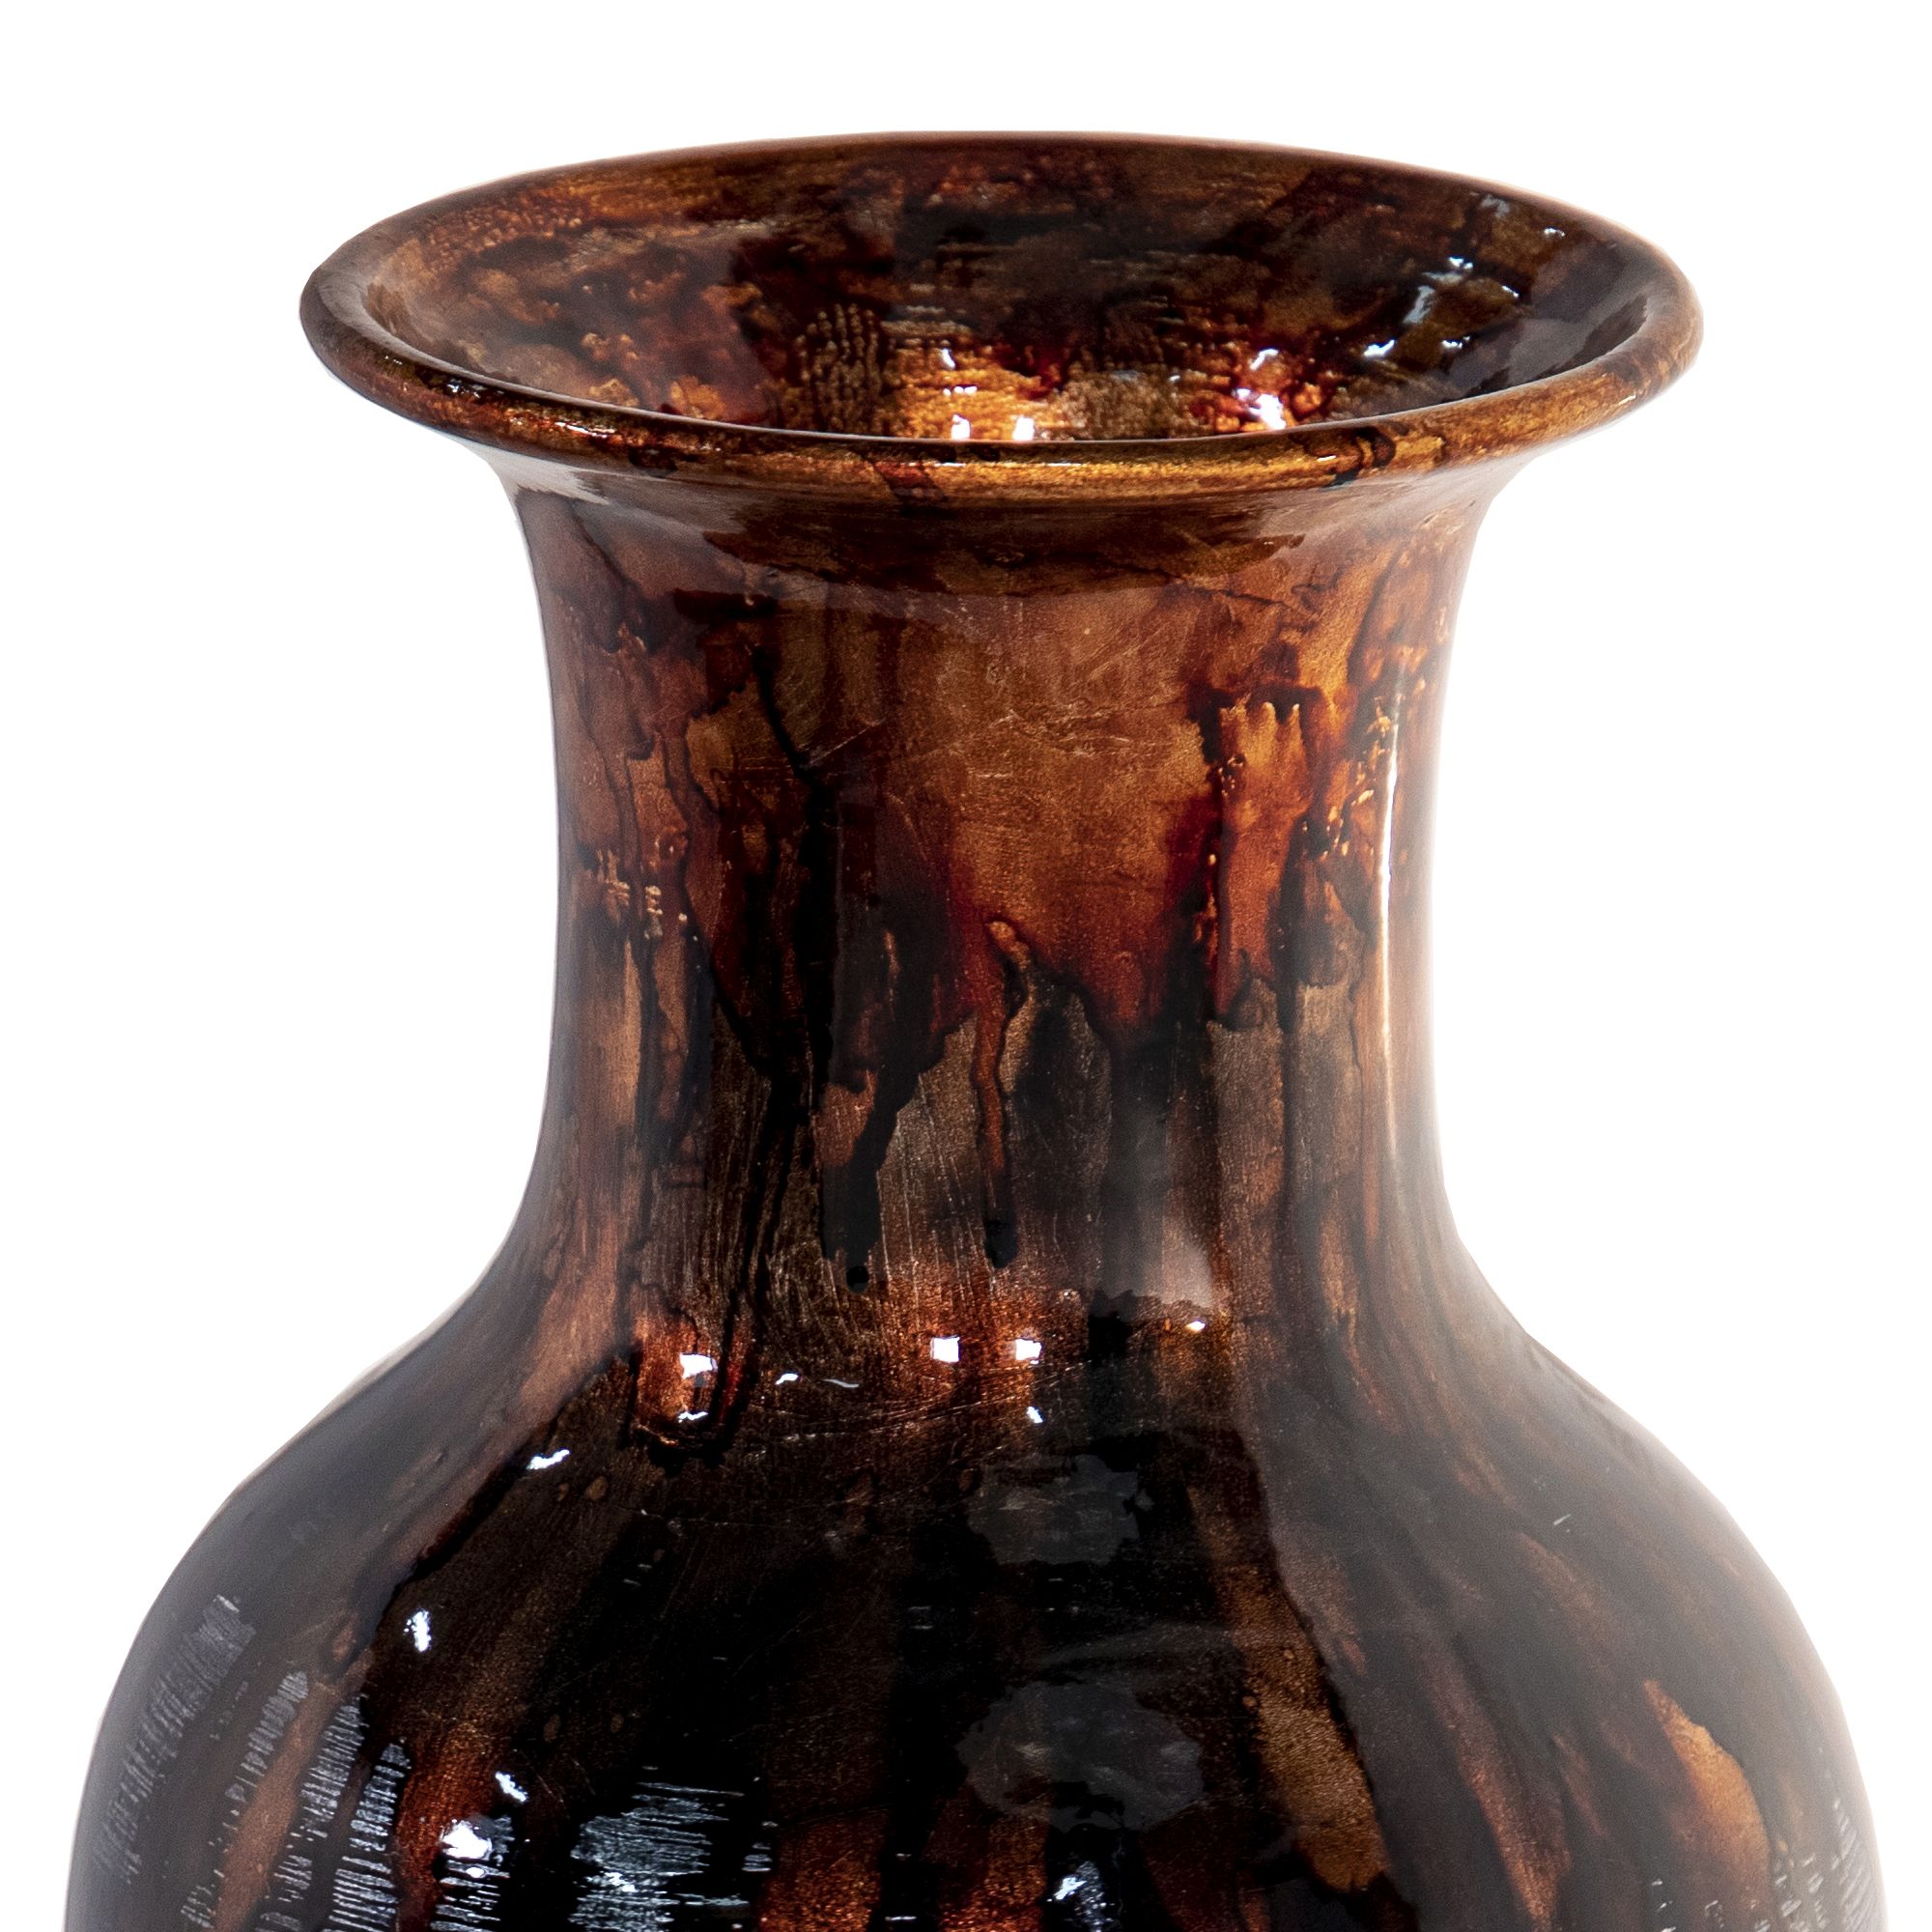 Lila Copper And Pewter Foil and Lacquer Ceramic Vase